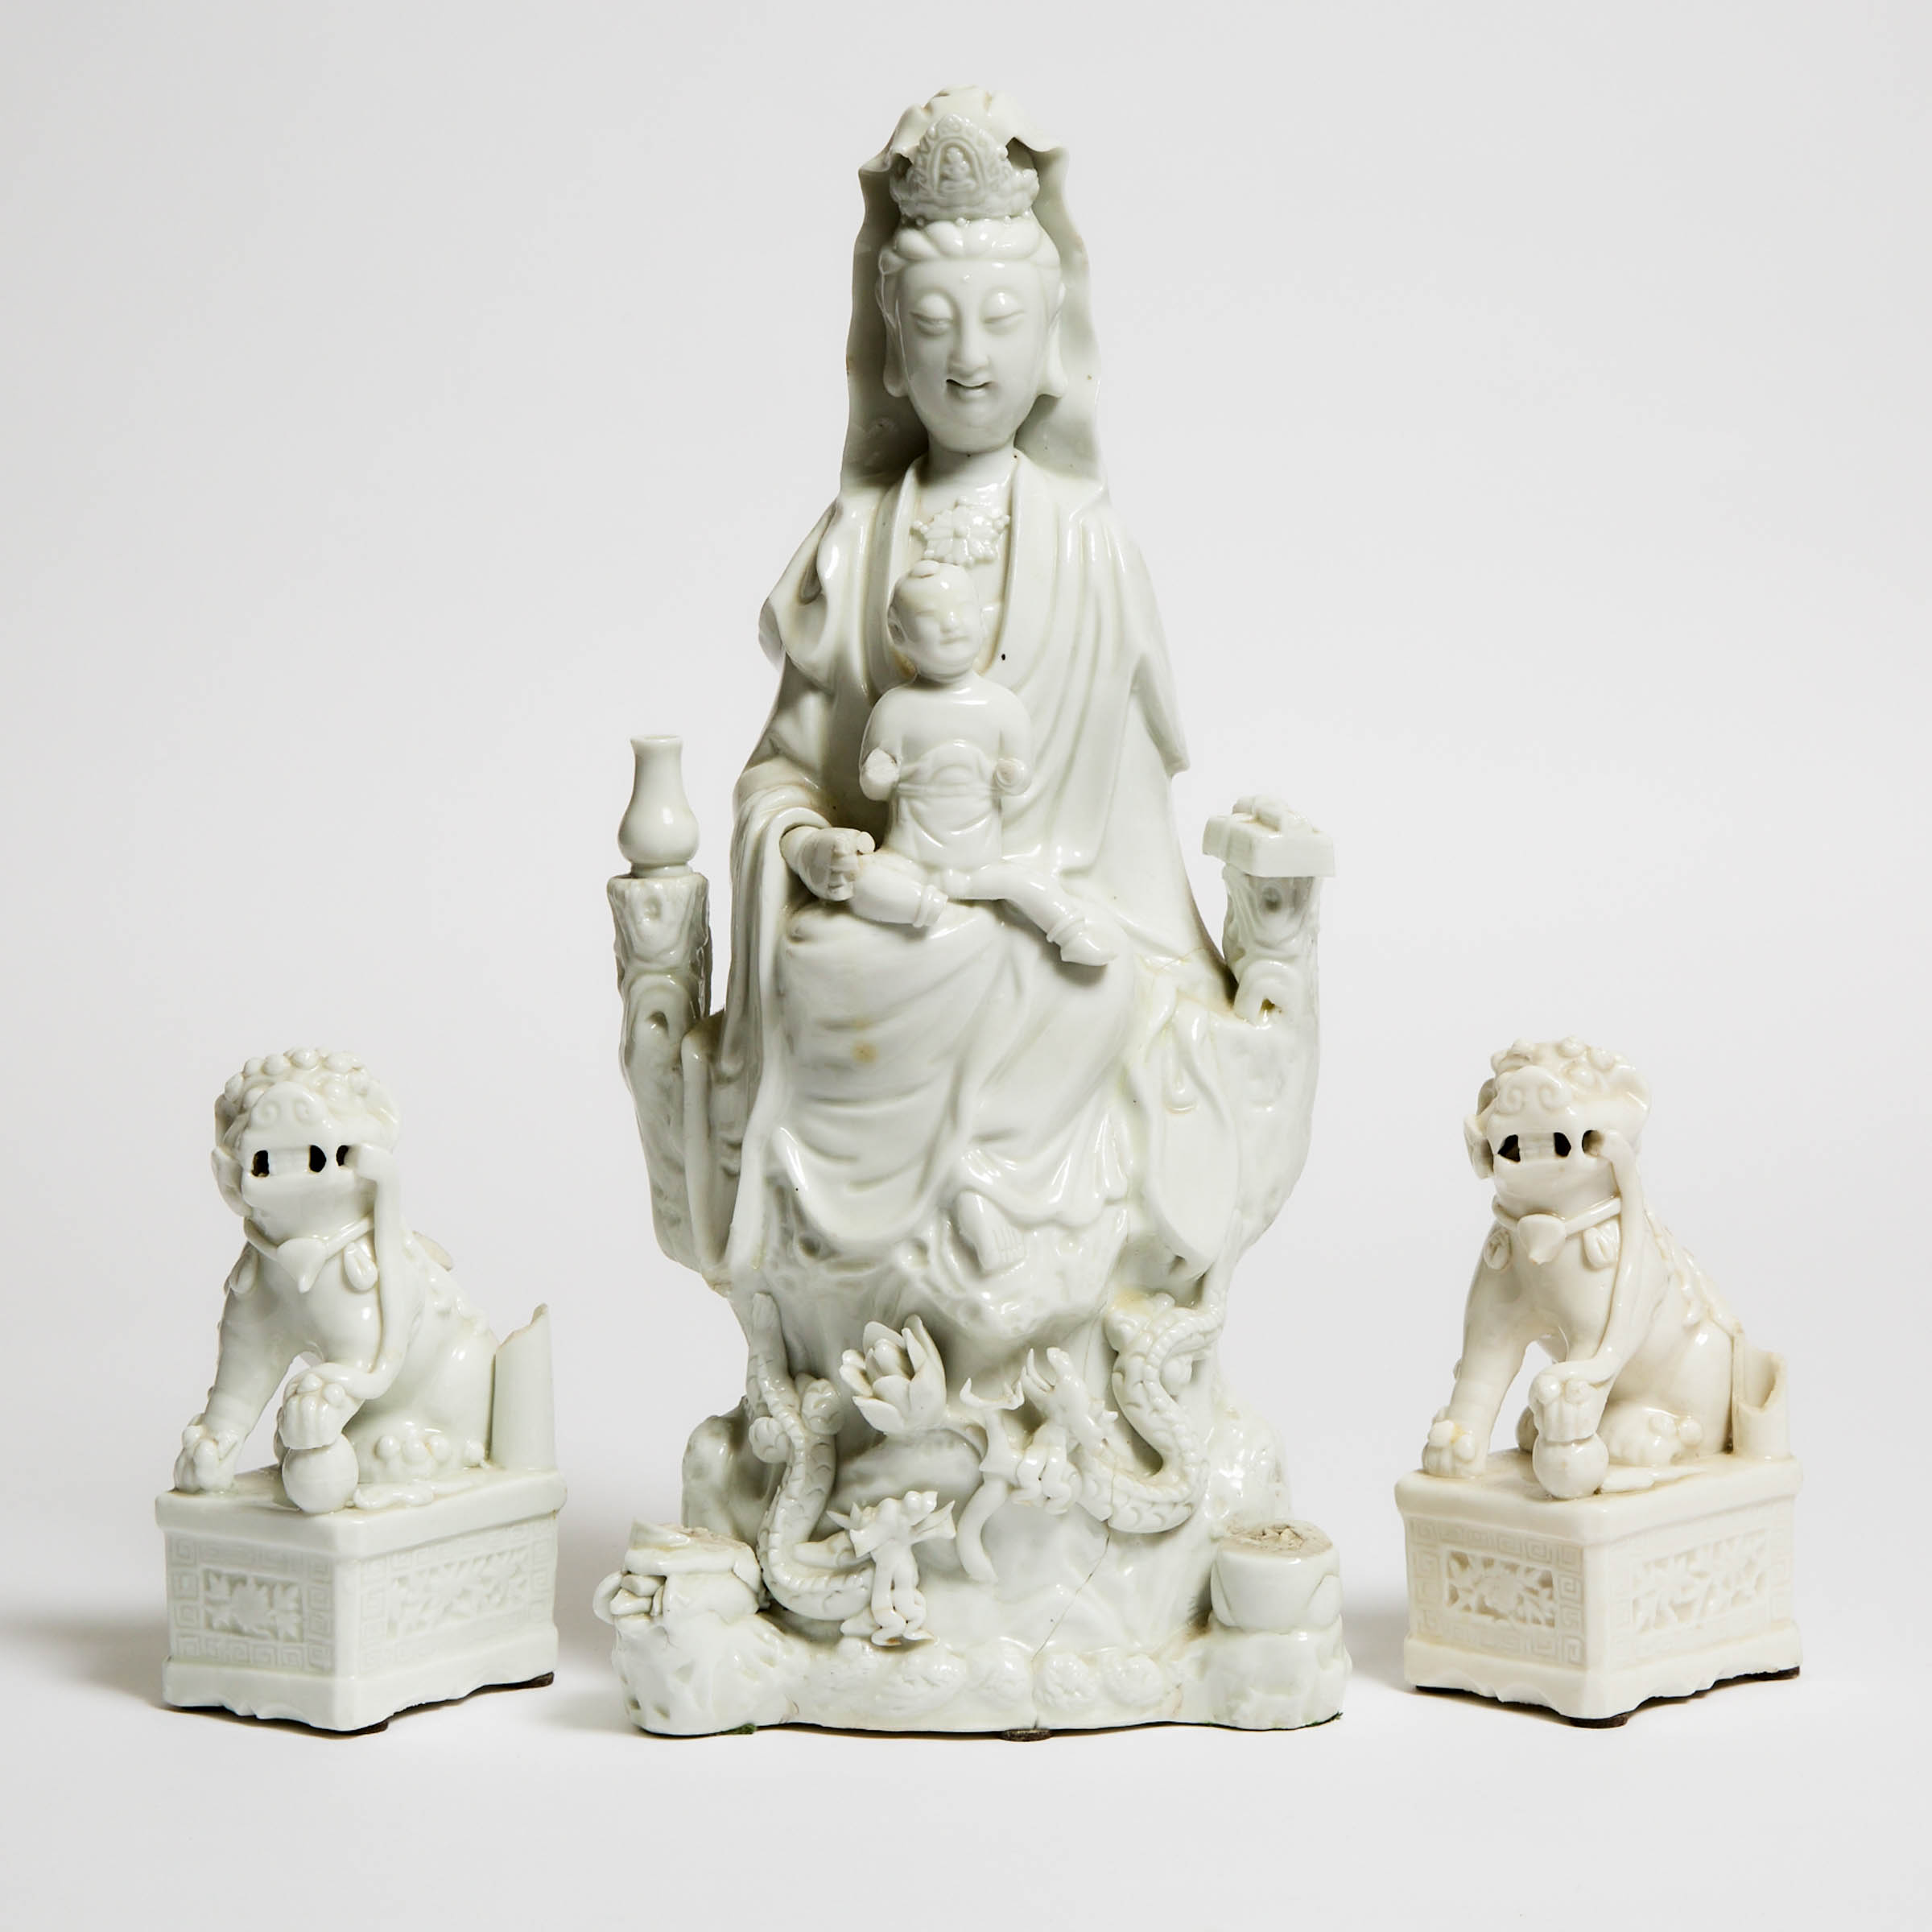 A Pair of Blanc de Chine Lions, Together With a Guanyin Group, Kangxi Period (1662-1722)